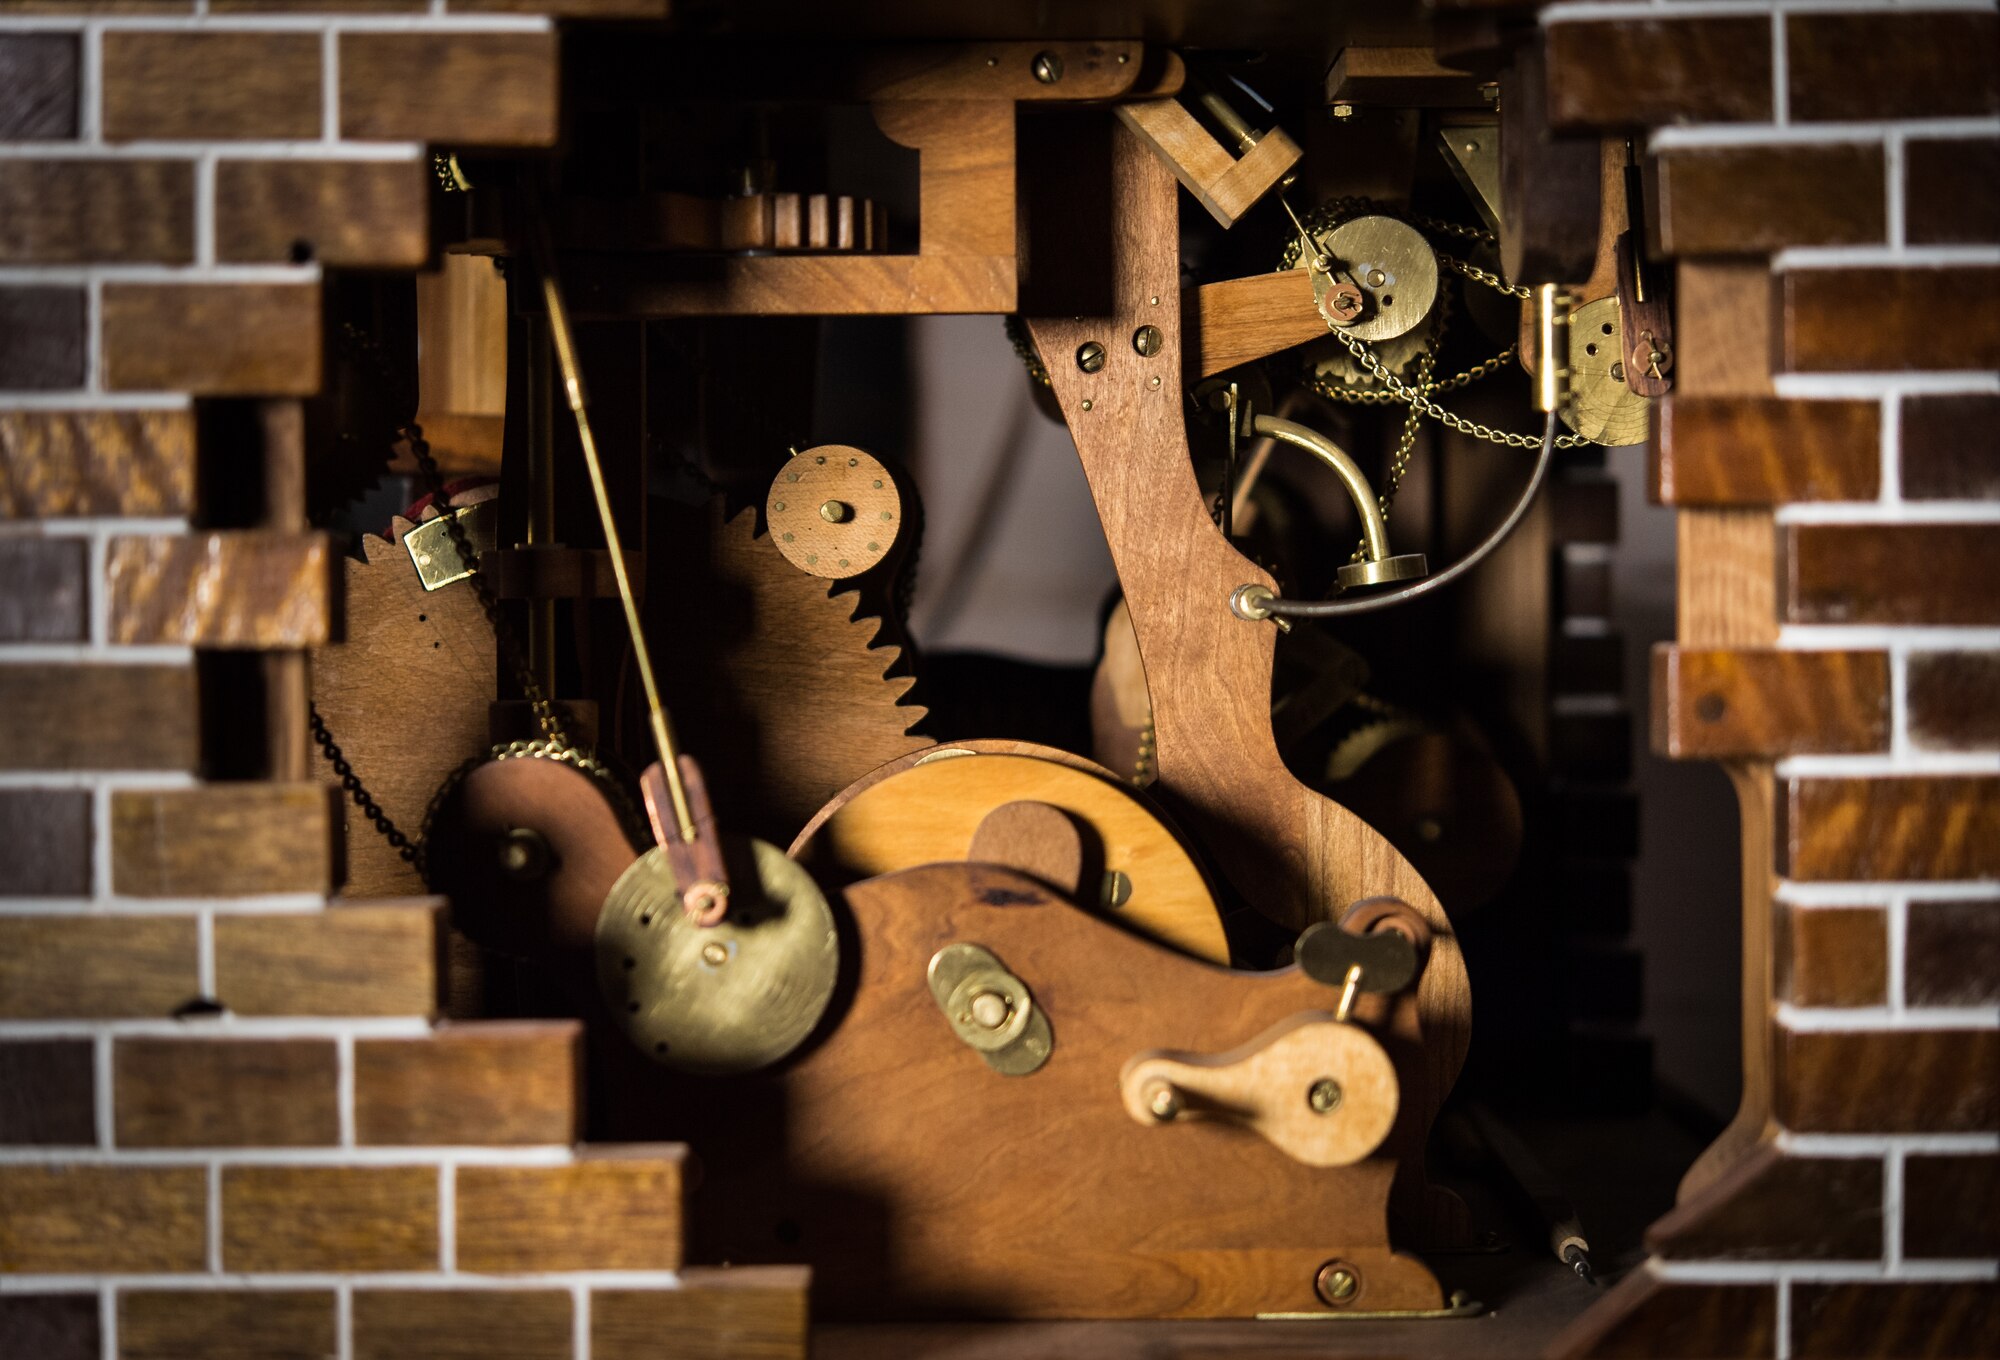 A mechanical folk art creation by retired U.S. Air Force Master Sgt. Daniel Holmes, uses handmade wooden gears, levers and cranks to operate at his home in Lowell, Mass., Jun. 1, 2018. Holmes utilizes his art to teach Airmen various electronic and mechanical skills not taught during their technical training in order for them to maintain 1960's era technology used at the Sagamore Hill Solar Observatory of the 2nd Weather Squadron, Det. 2, in Hamilton, Mass. (U.S. Air Force photo by J.M. Eddins Jr.)